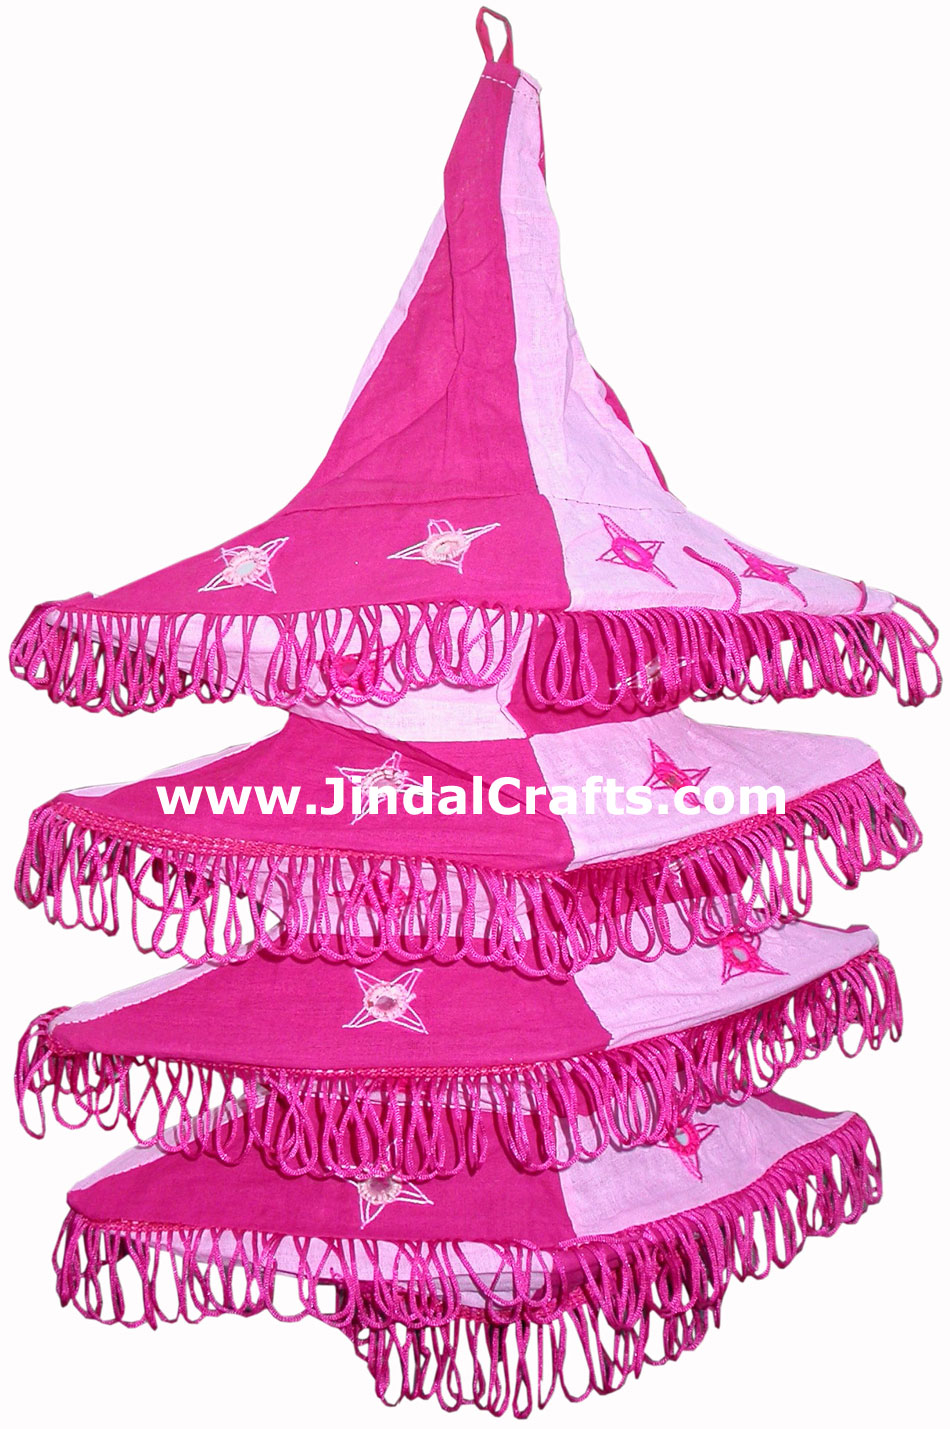 Colourful Fabric Lamp Shade Hand Made Rich Art Craft Handicrafts from India